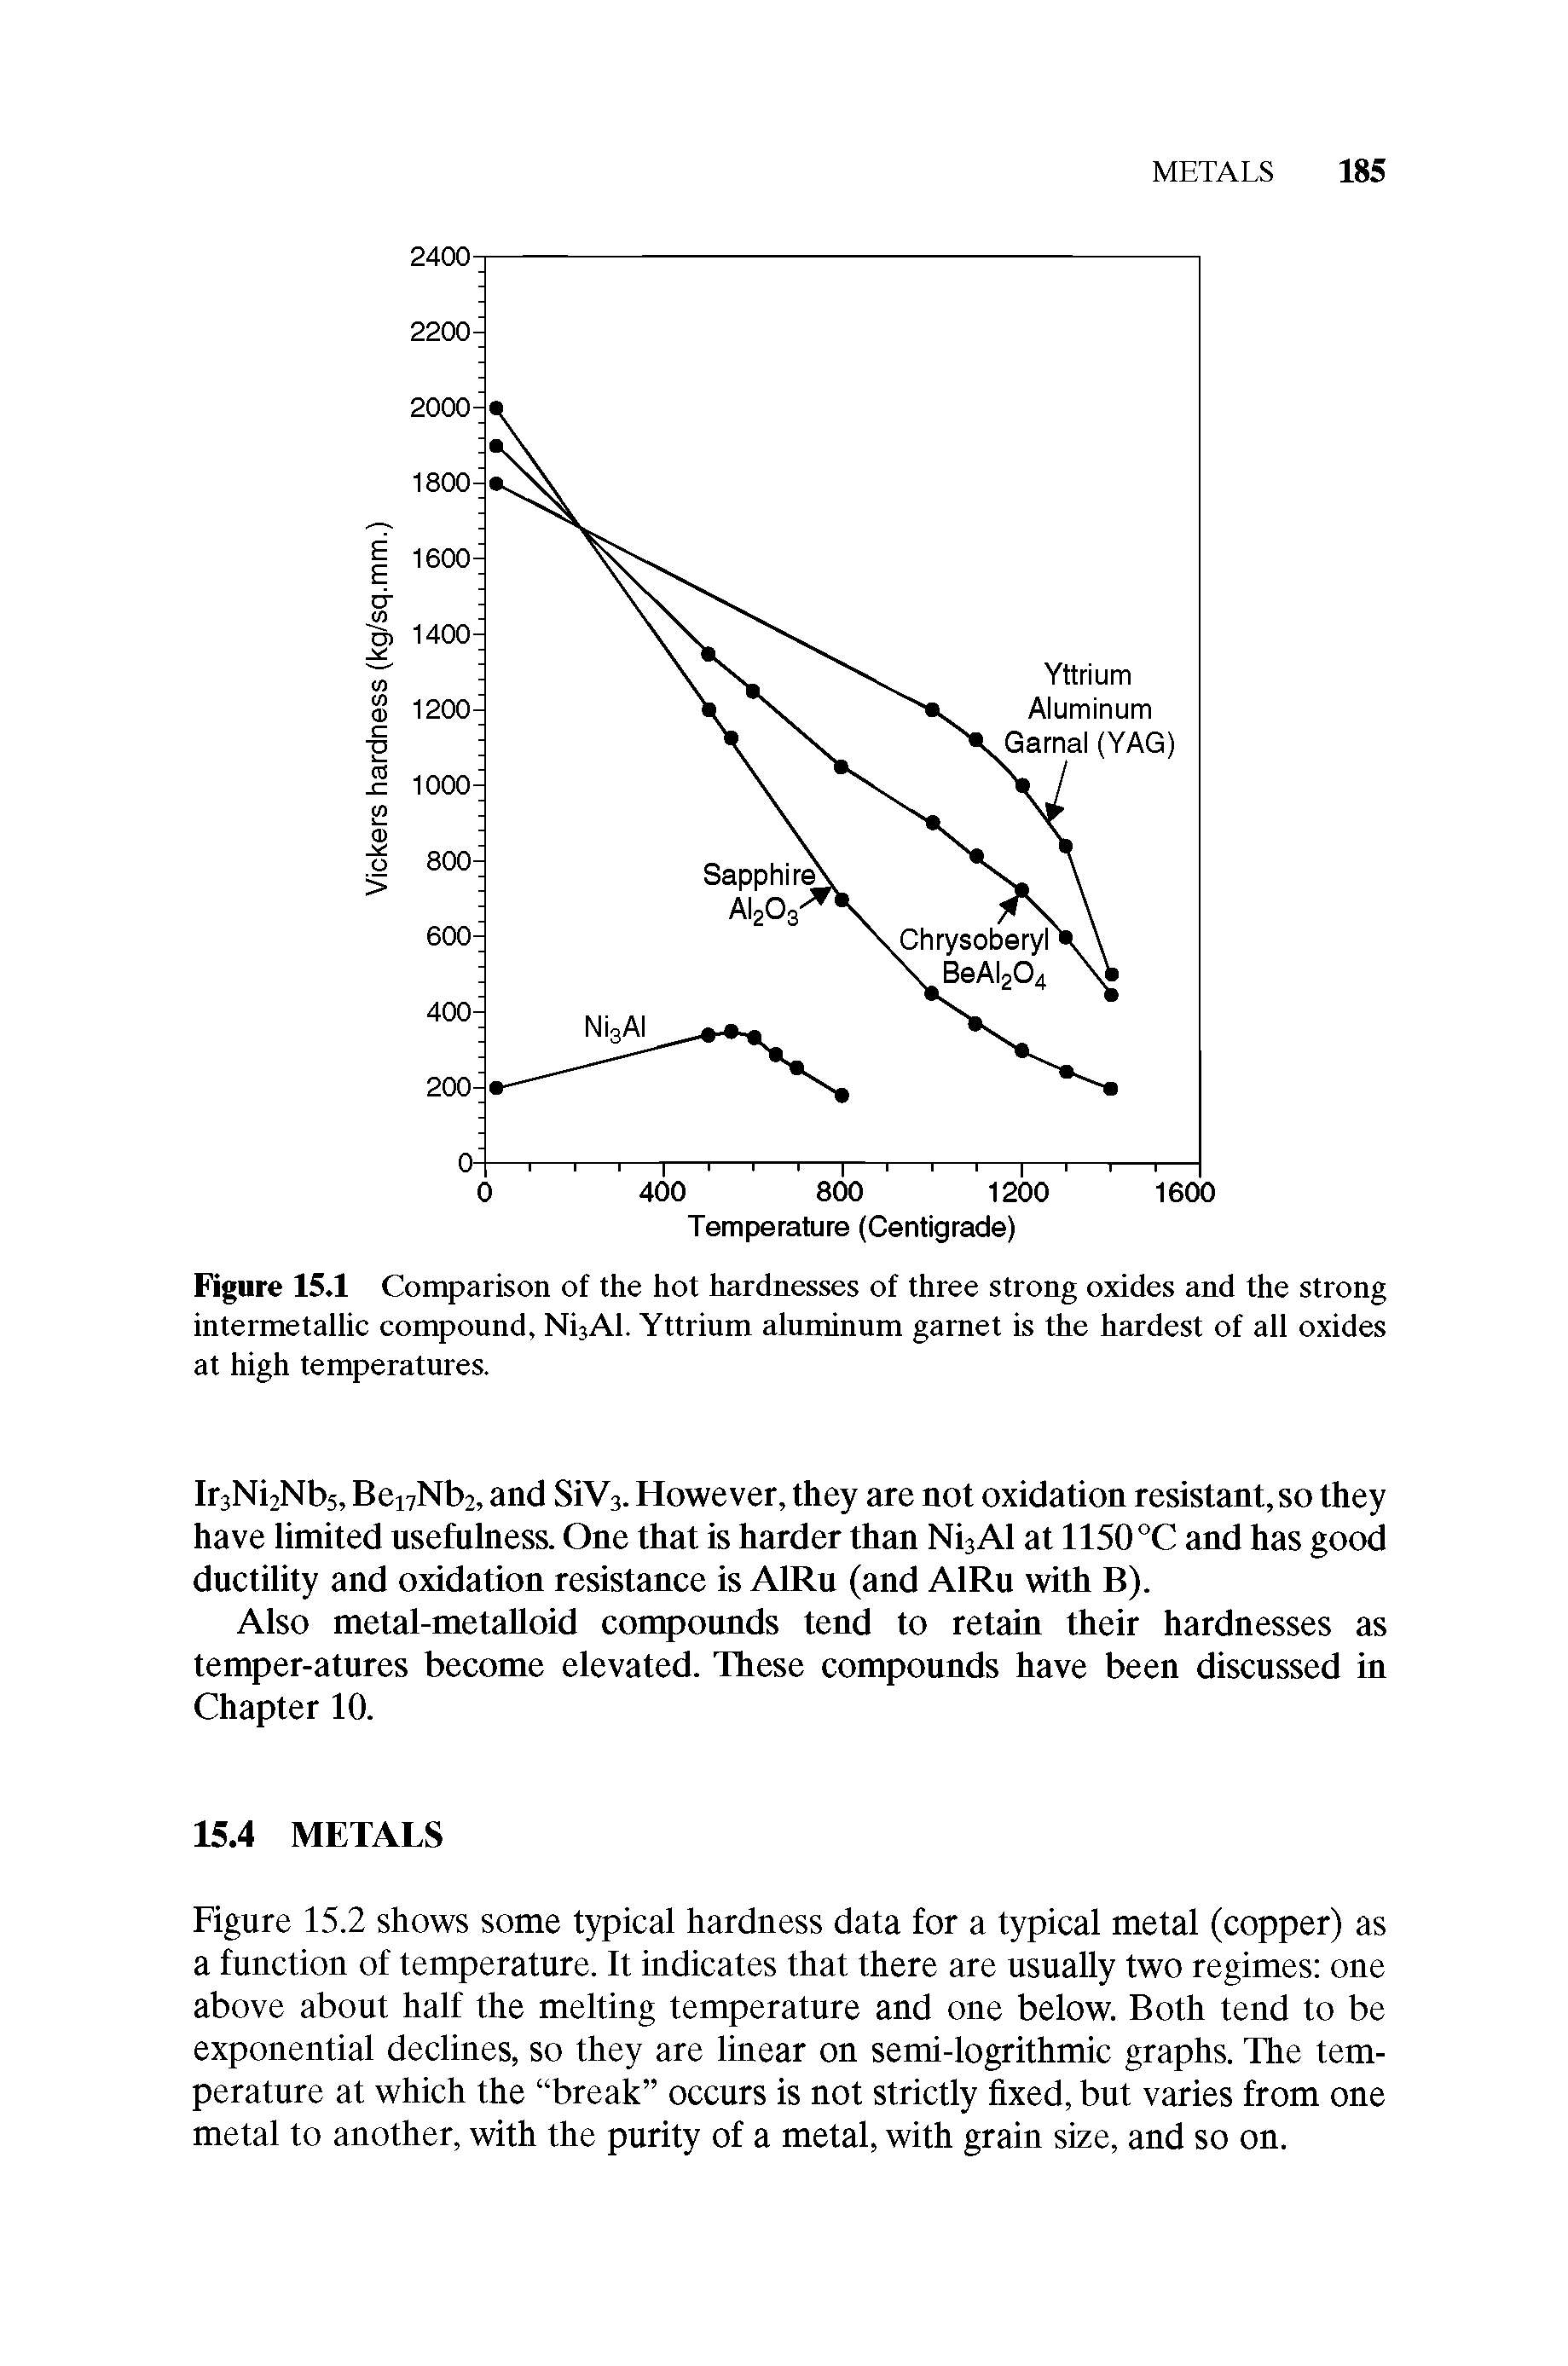 Figure 15.1 Comparison of the hot hardnesses of three strong oxides and the strong intermetallic compound, Ni3Al. Yttrium aluminum garnet is the hardest of all oxides at high temperatures.